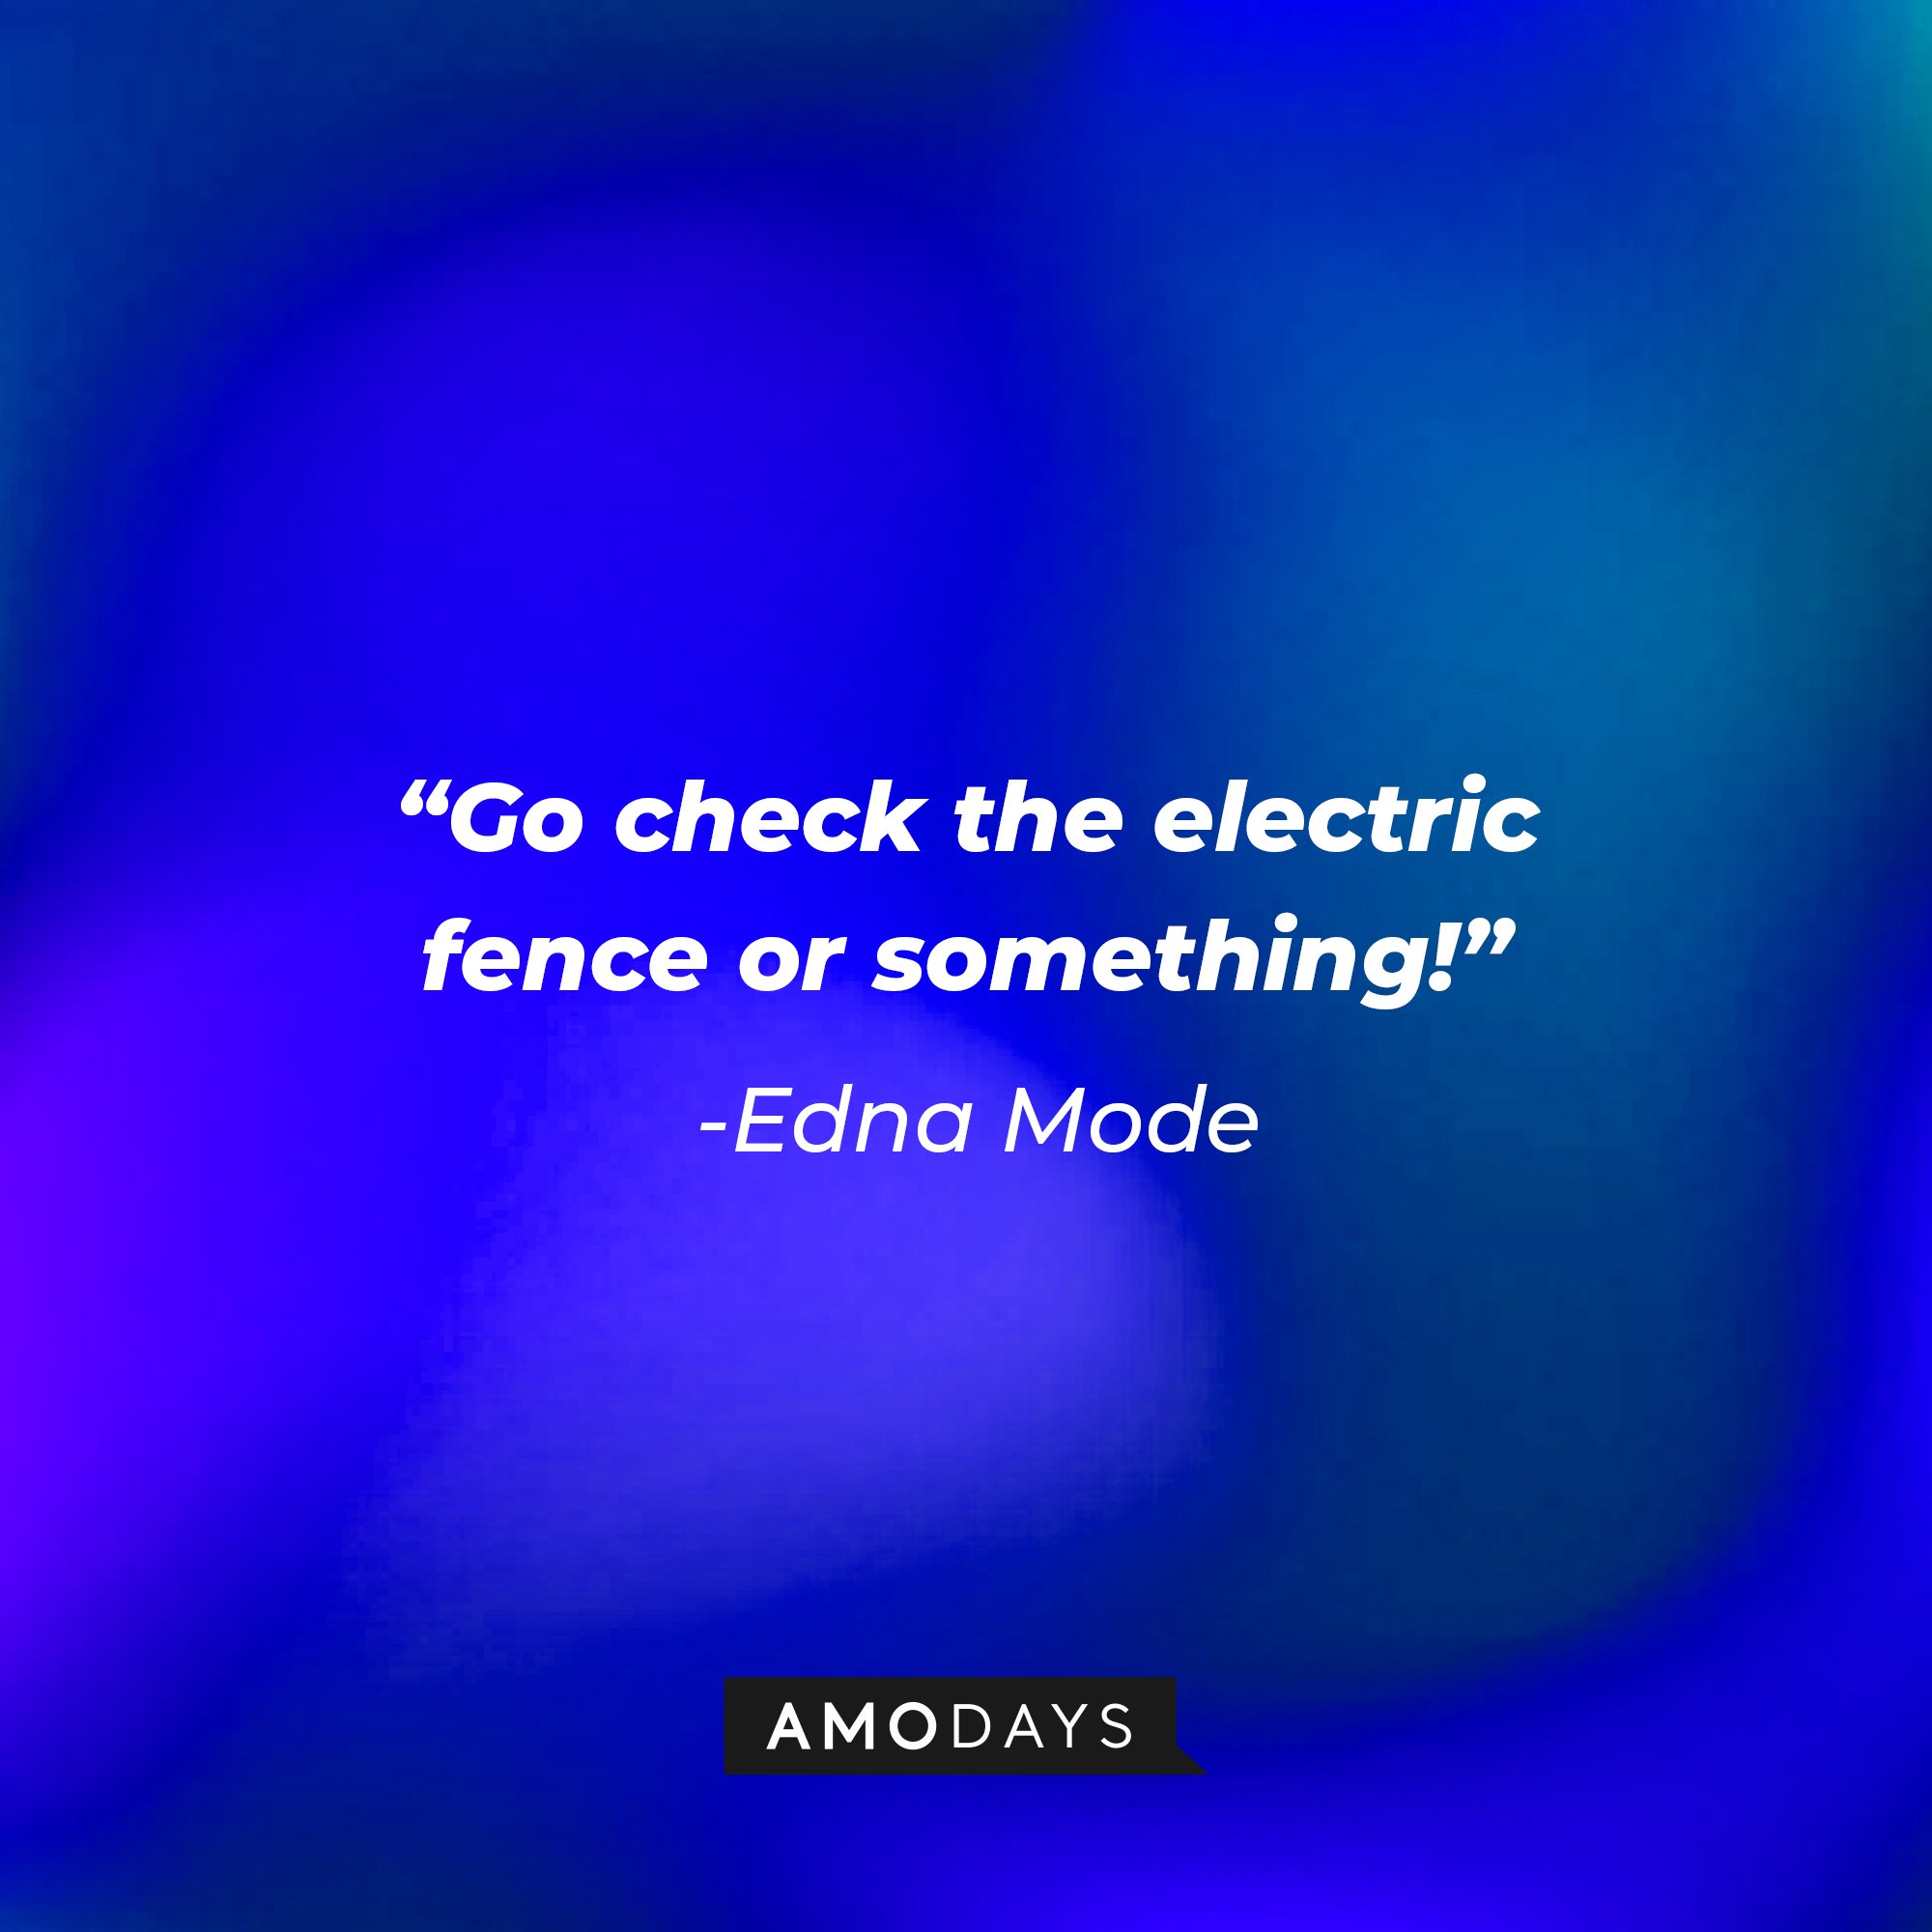 Edna Mode’s quote: "Go check the electric fence or something!" | Image: AmoDays